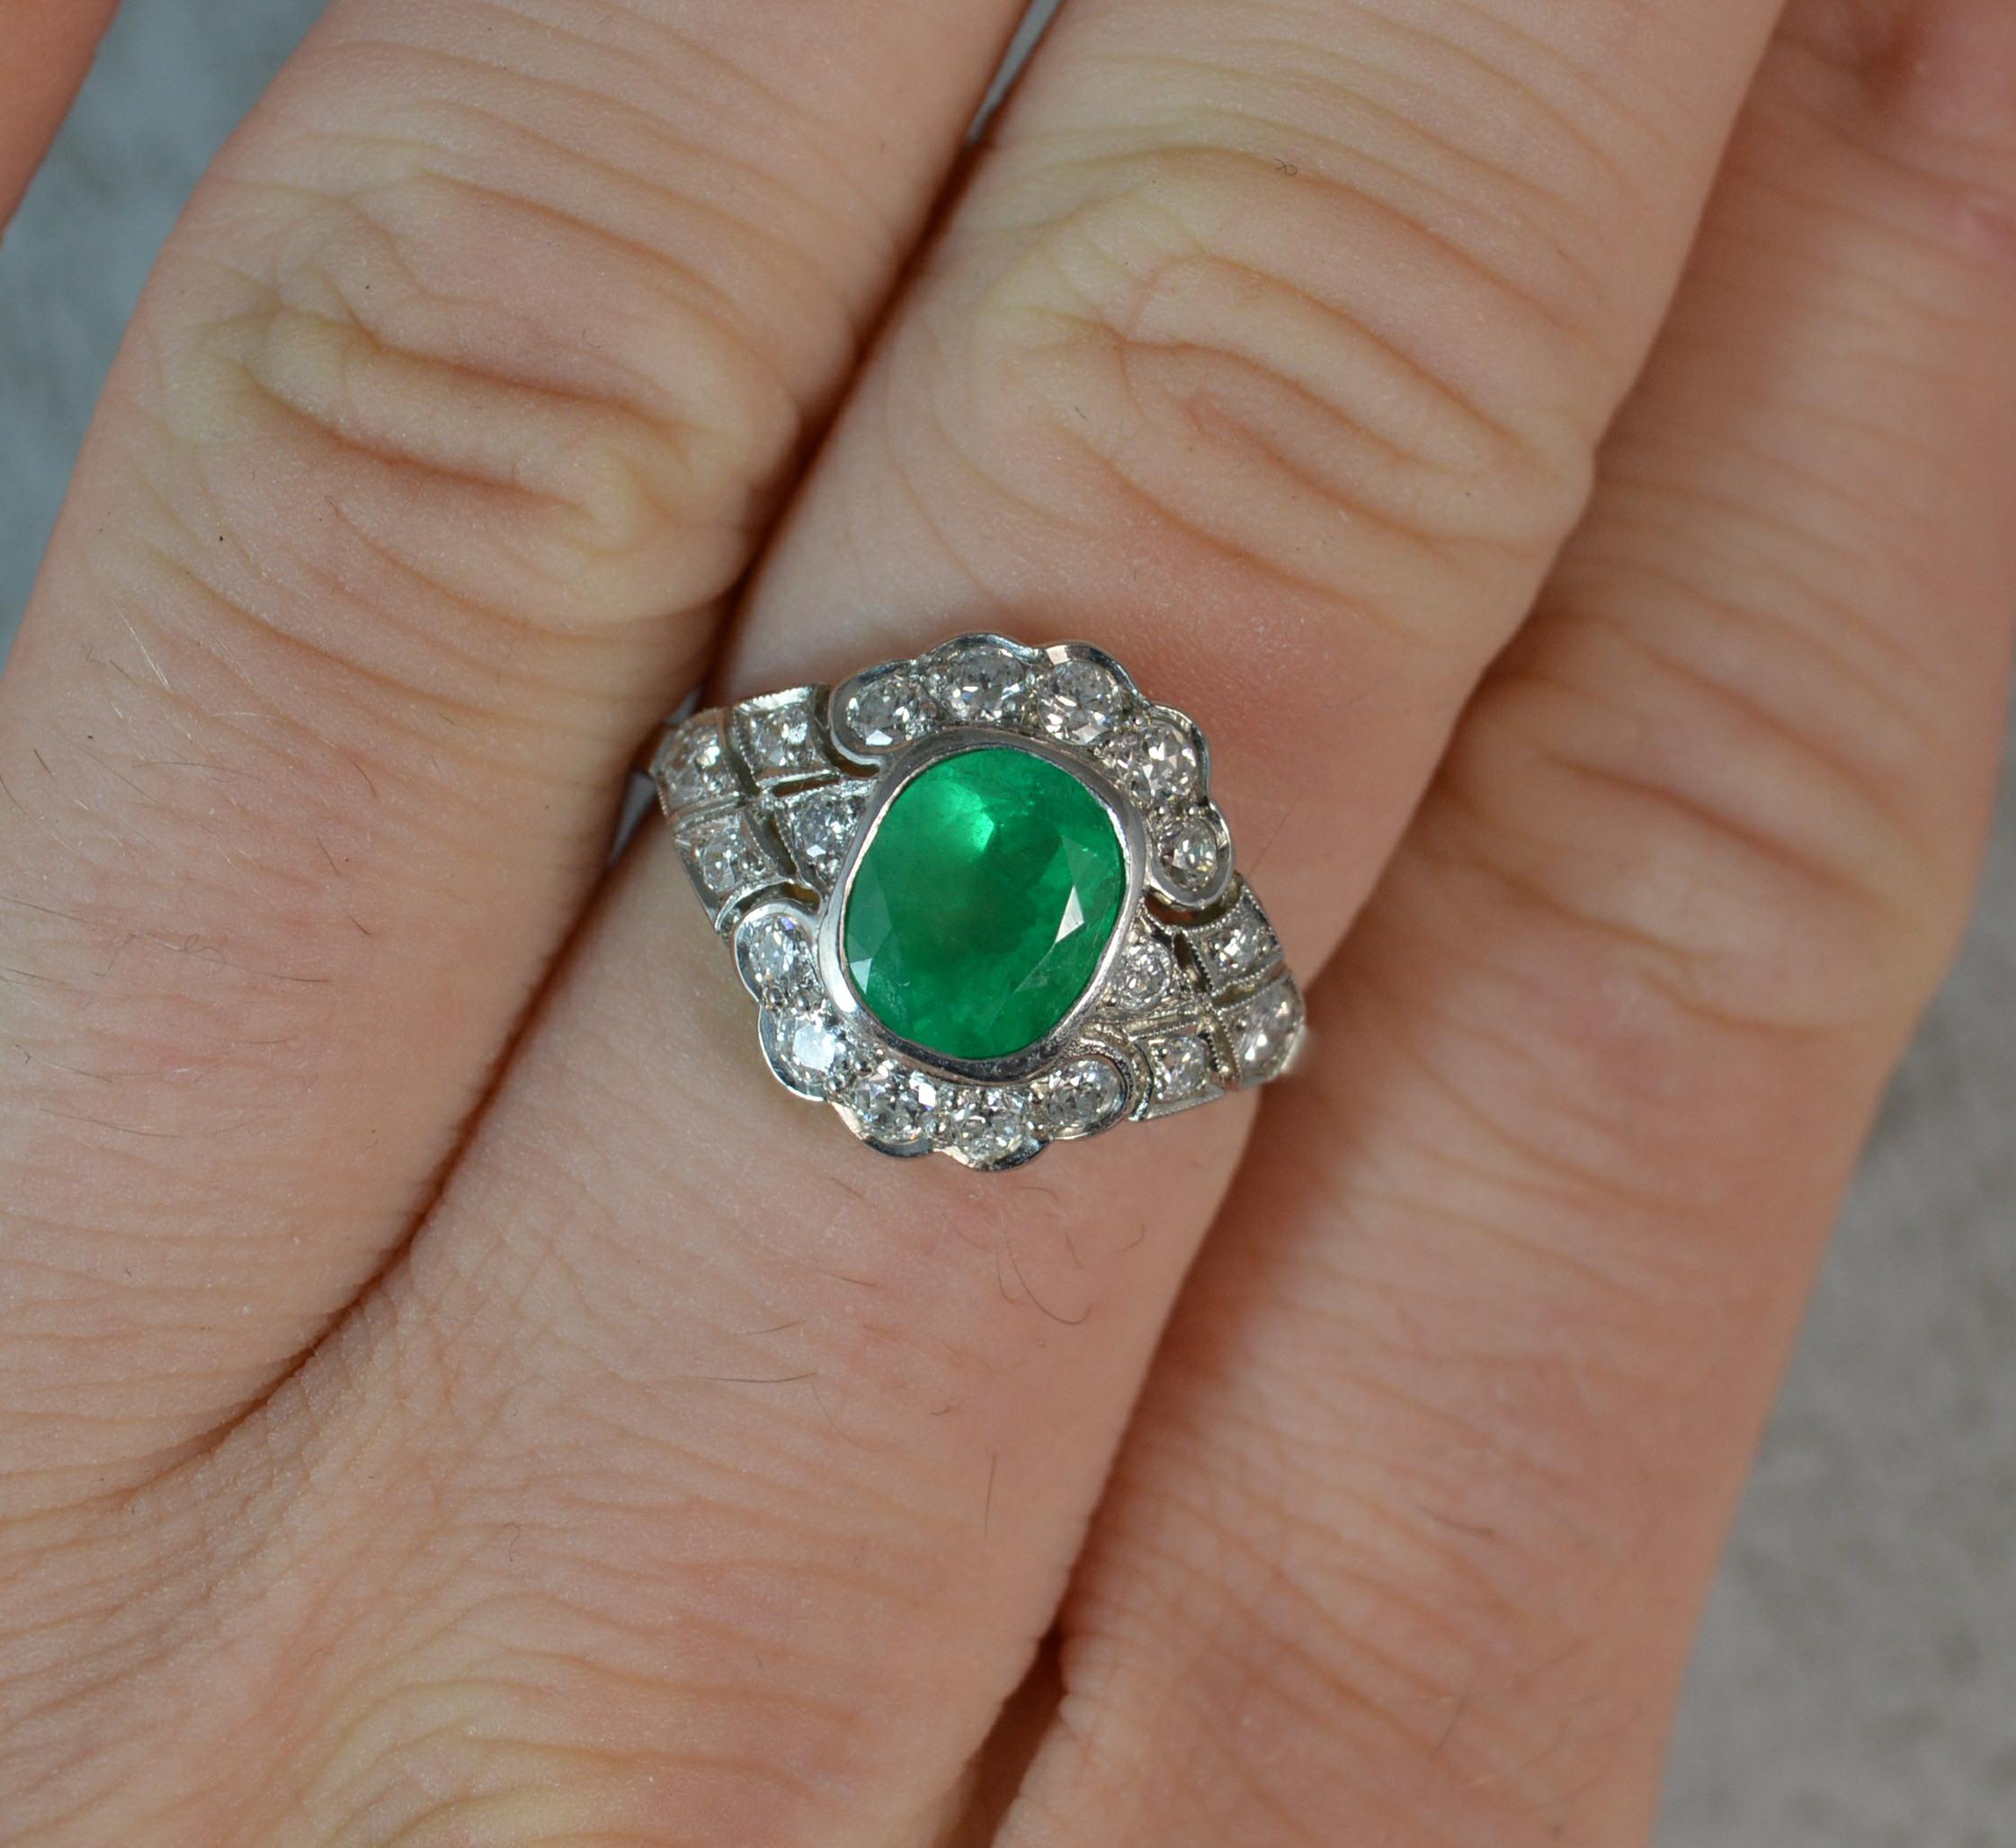 A stunning natural Emerald and Diamond ring.
Ring Size; N UK, 6 3/4 US
Modelled in 950 grade platinum.
Designed with a cushion oval emerald, believed to be of Colombian origin in bezel setting. Surrounding are 18 natural Vs clarity diamonds in grain